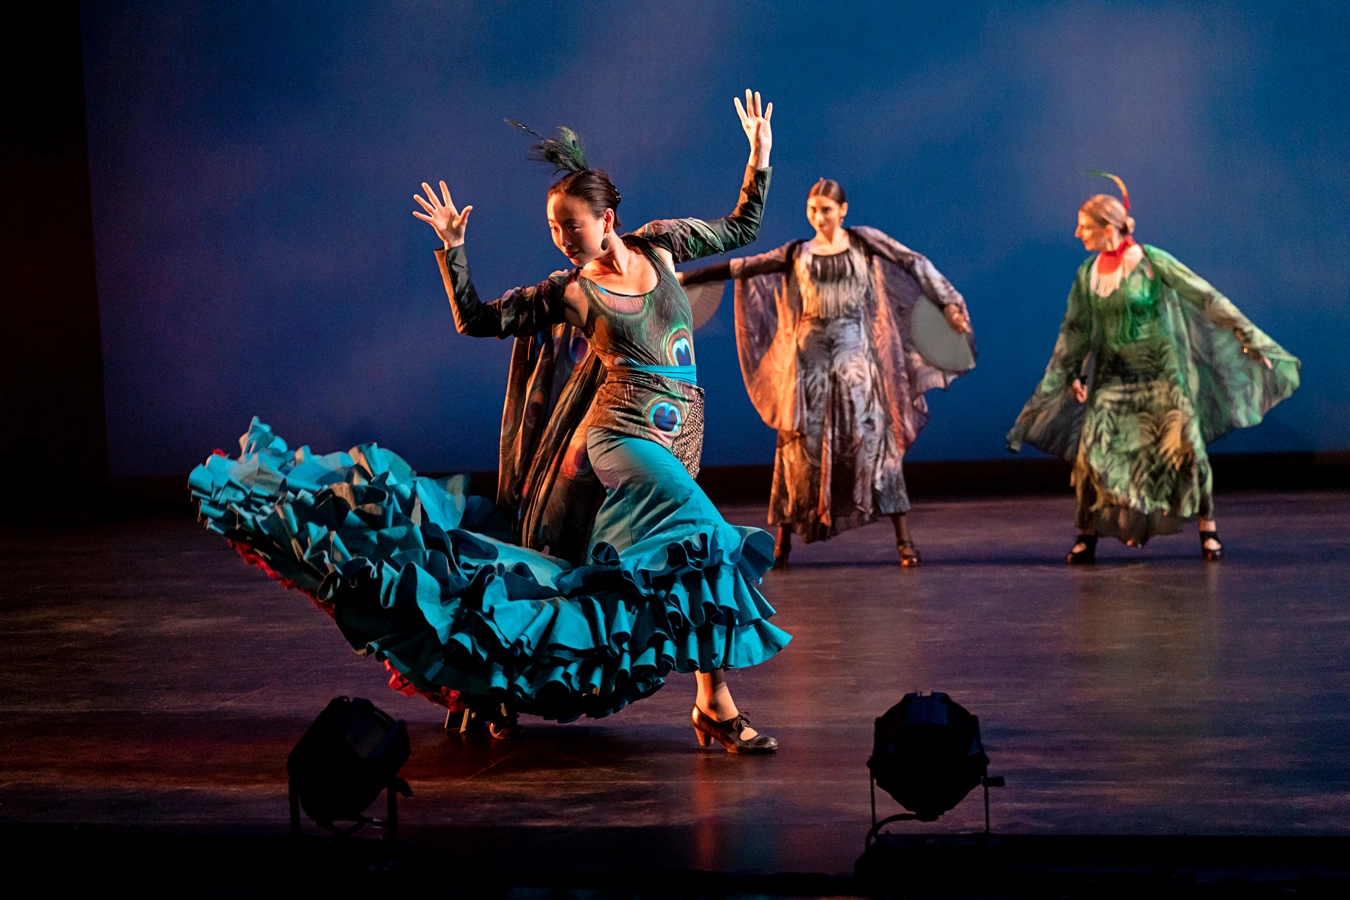 A flamenco dancer in a costume evocative of a peacock flicks her teal ruffled skirt behind her hands raised above the shoulder. In the background, two other dancers move through wide stances.